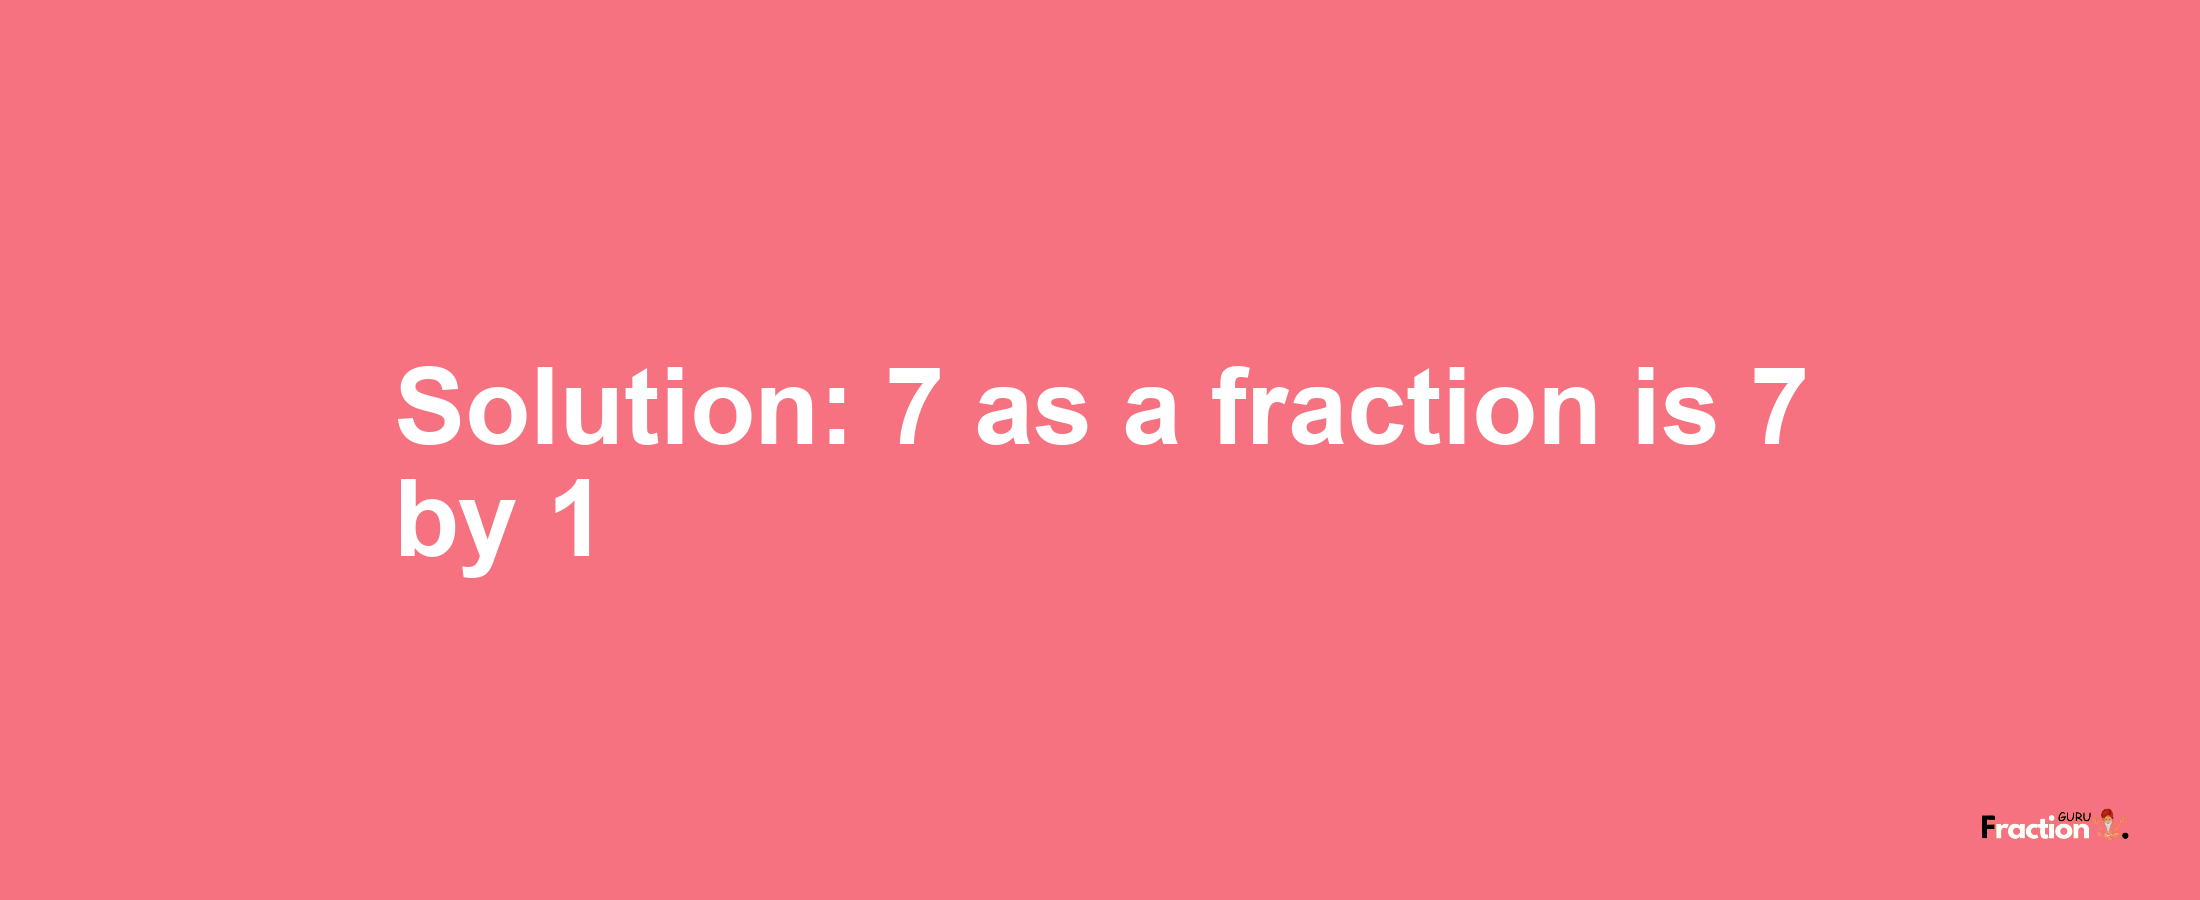 Solution:7 as a fraction is 7/1